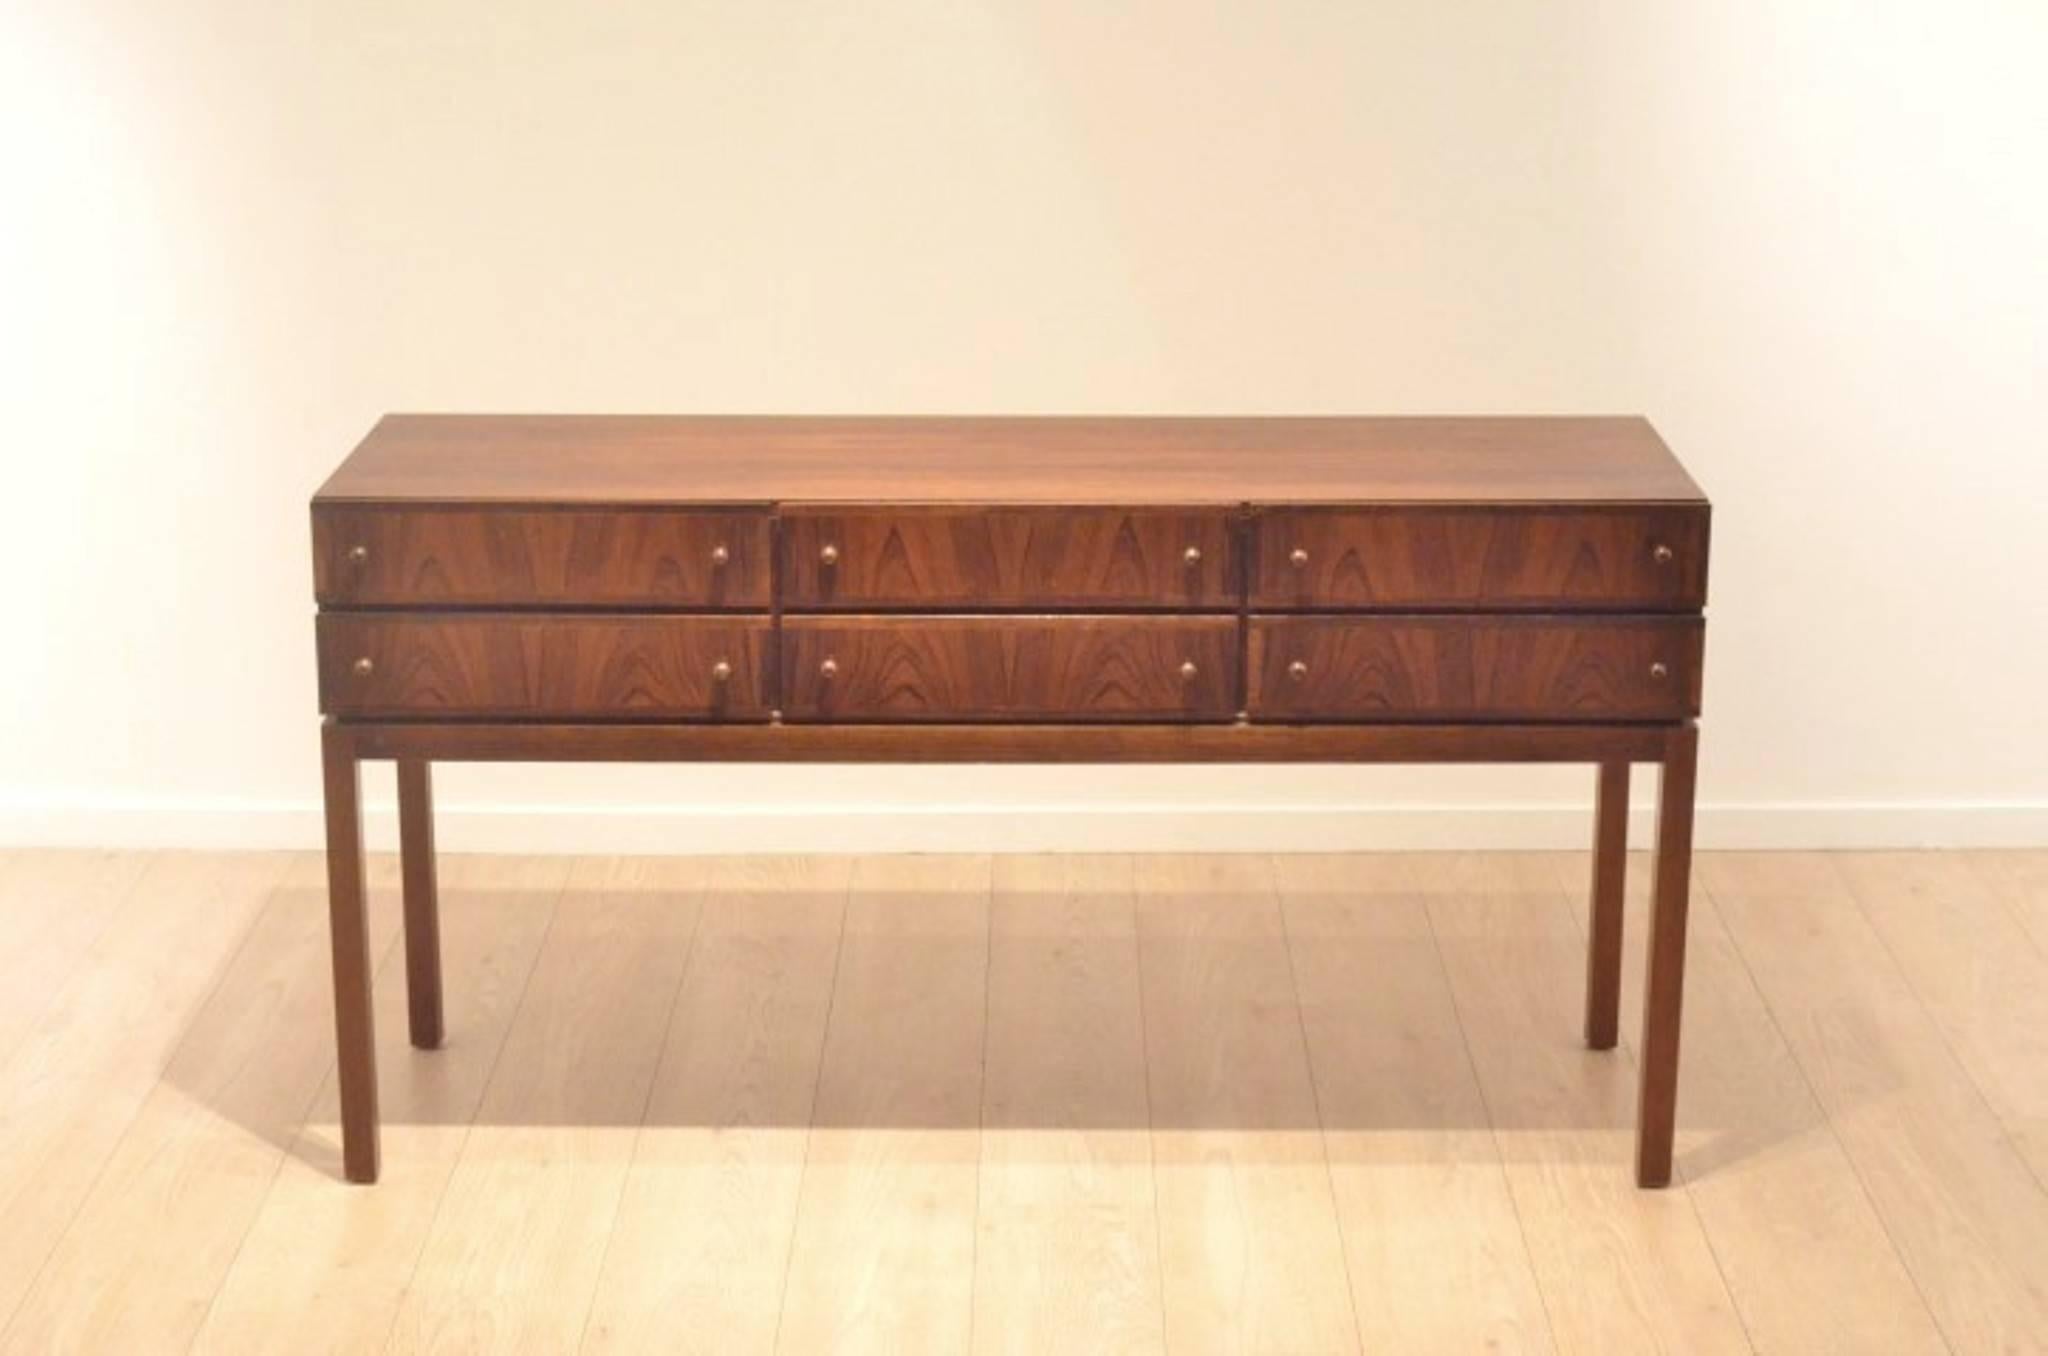 Elegant sideboard made in solid and veneer rosewood composed of six drawers with rounded solid wood handles made in the 1950s in Denmark.